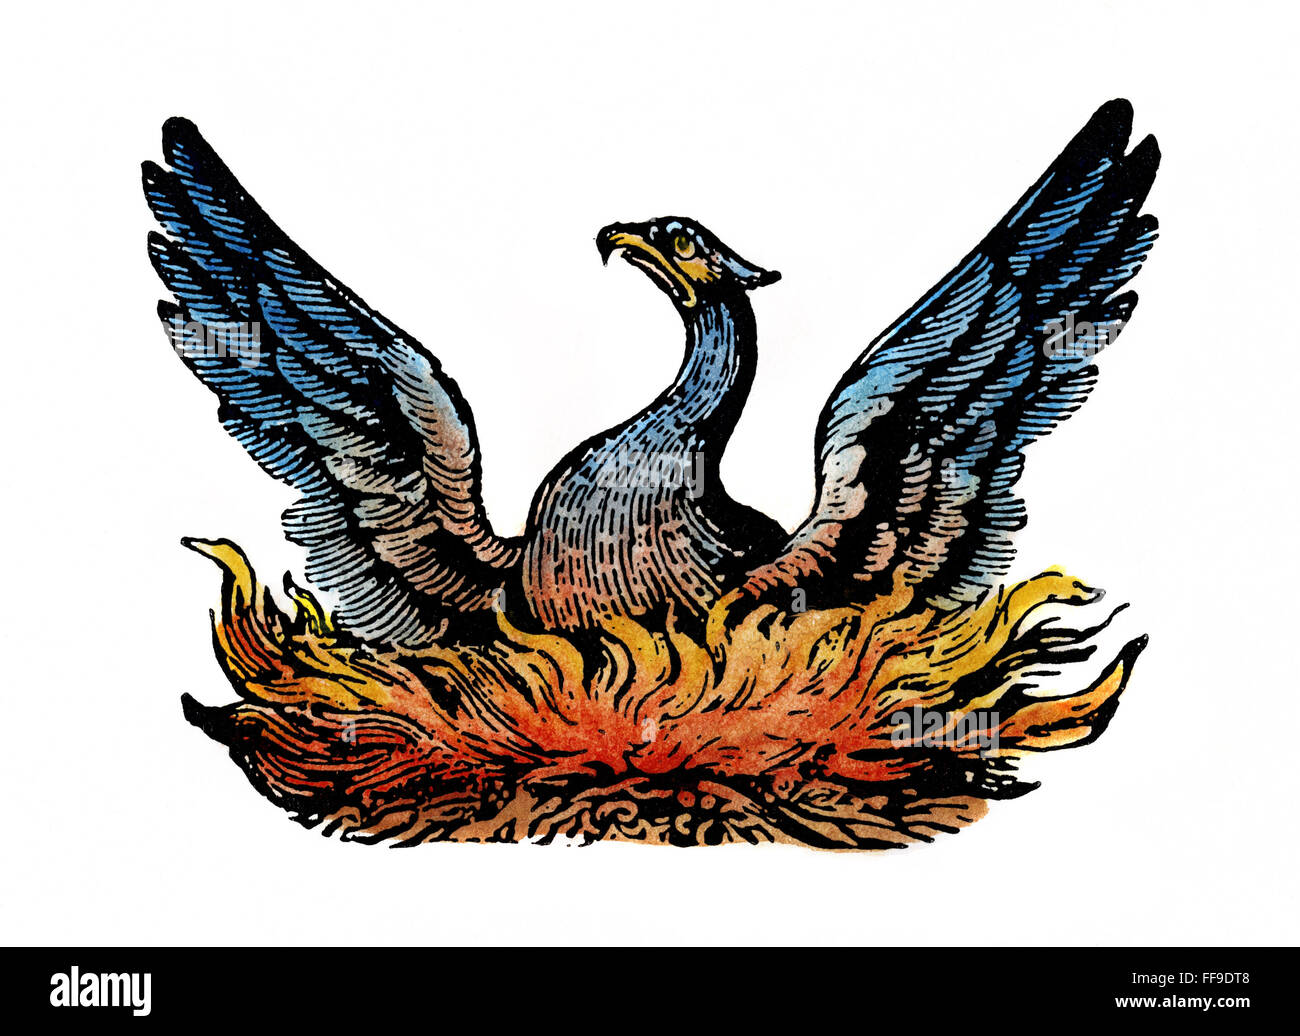 PHOENIX RISING FROM ASHES. /NAmerican typefounder's cut, 19e siècle. Banque D'Images